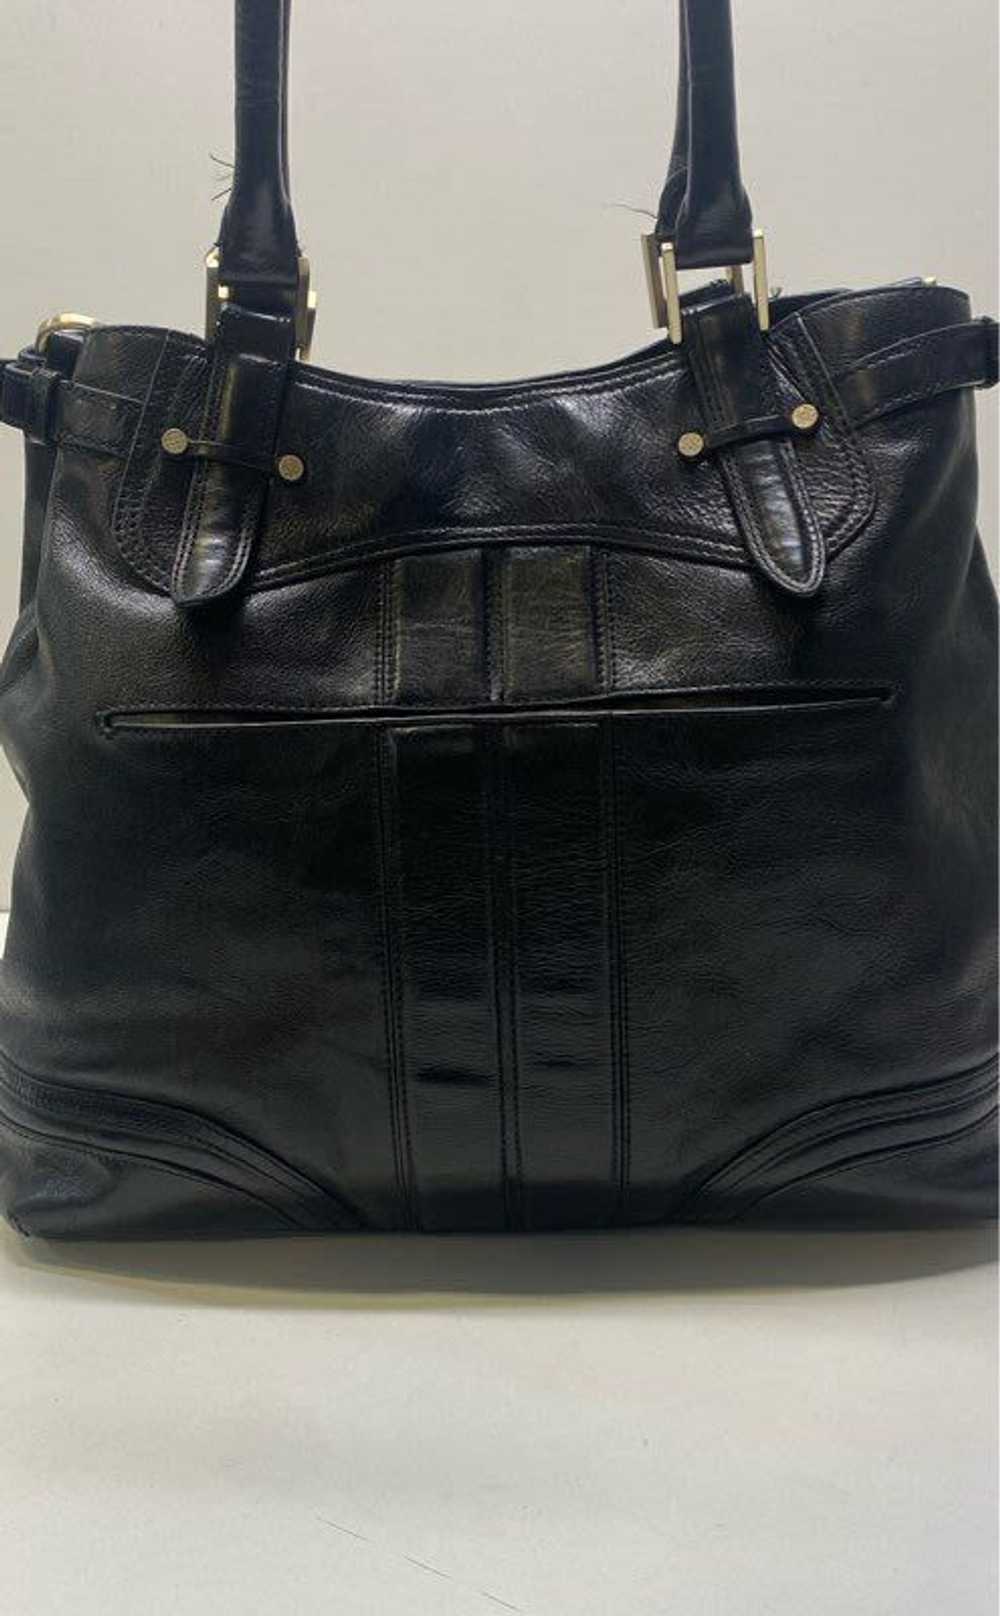 Cole Haan Black Leather Tote Bag - image 2